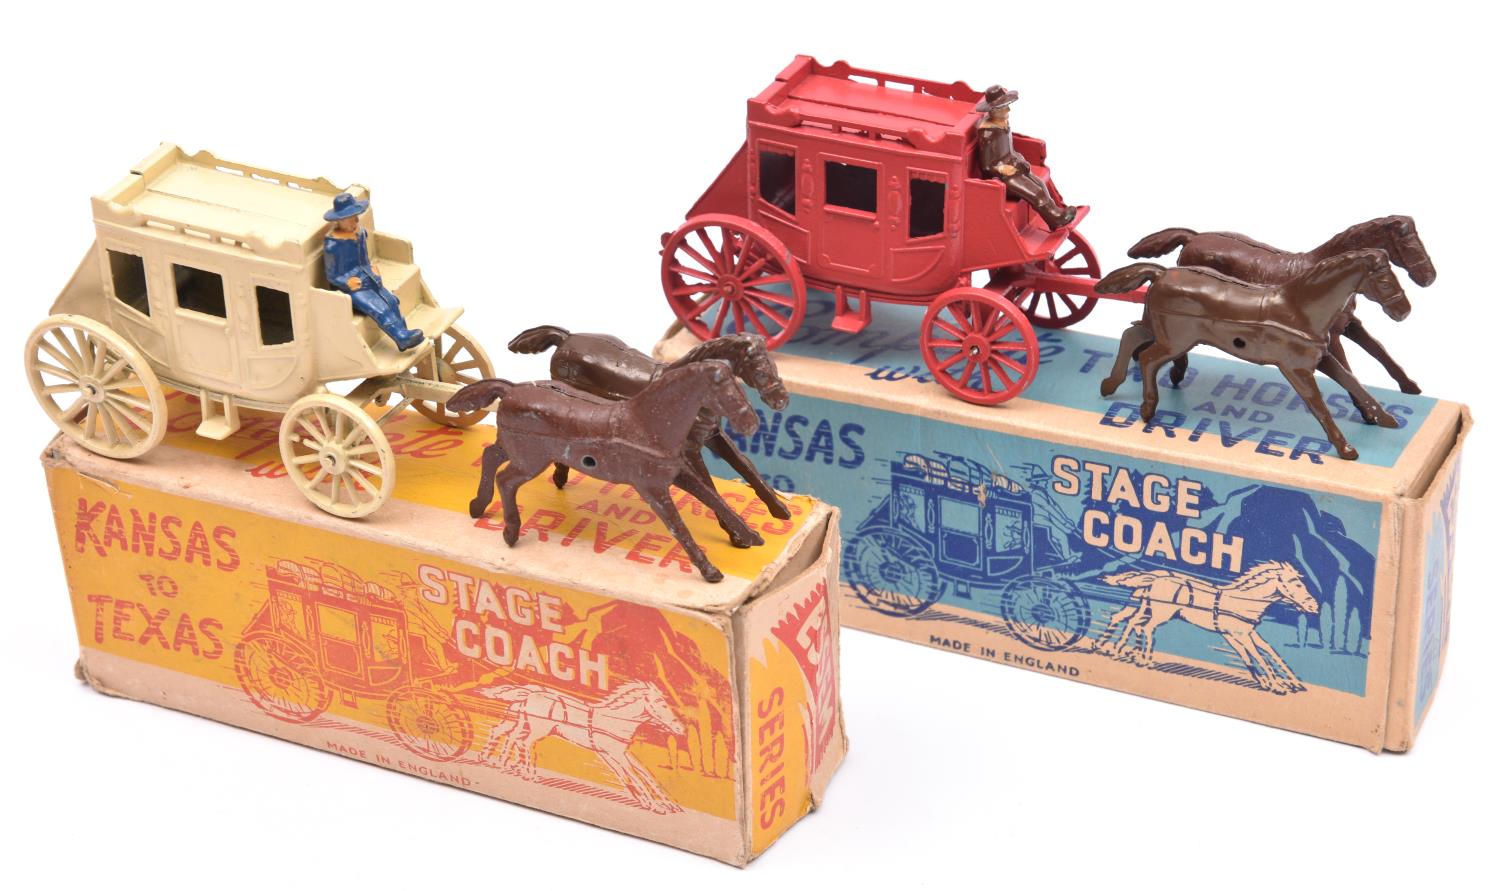 2 Essem Series Kansas to Texas Stage Coaches. One in red with two brown horses and a brown rider.